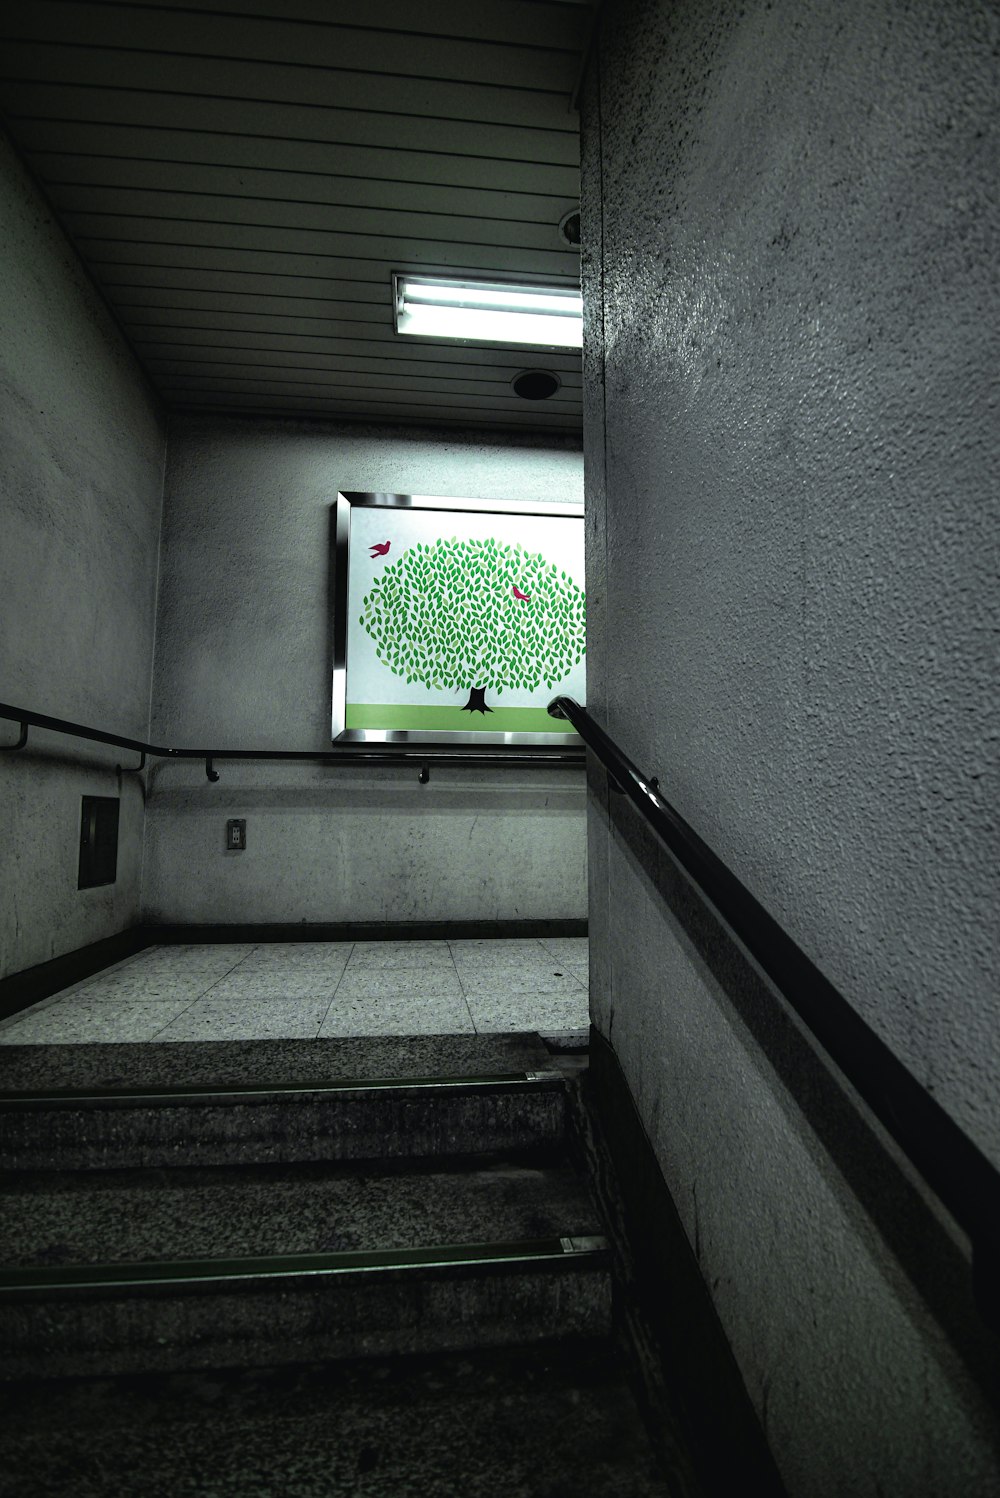 a picture of a tree on a screen in a stairwell